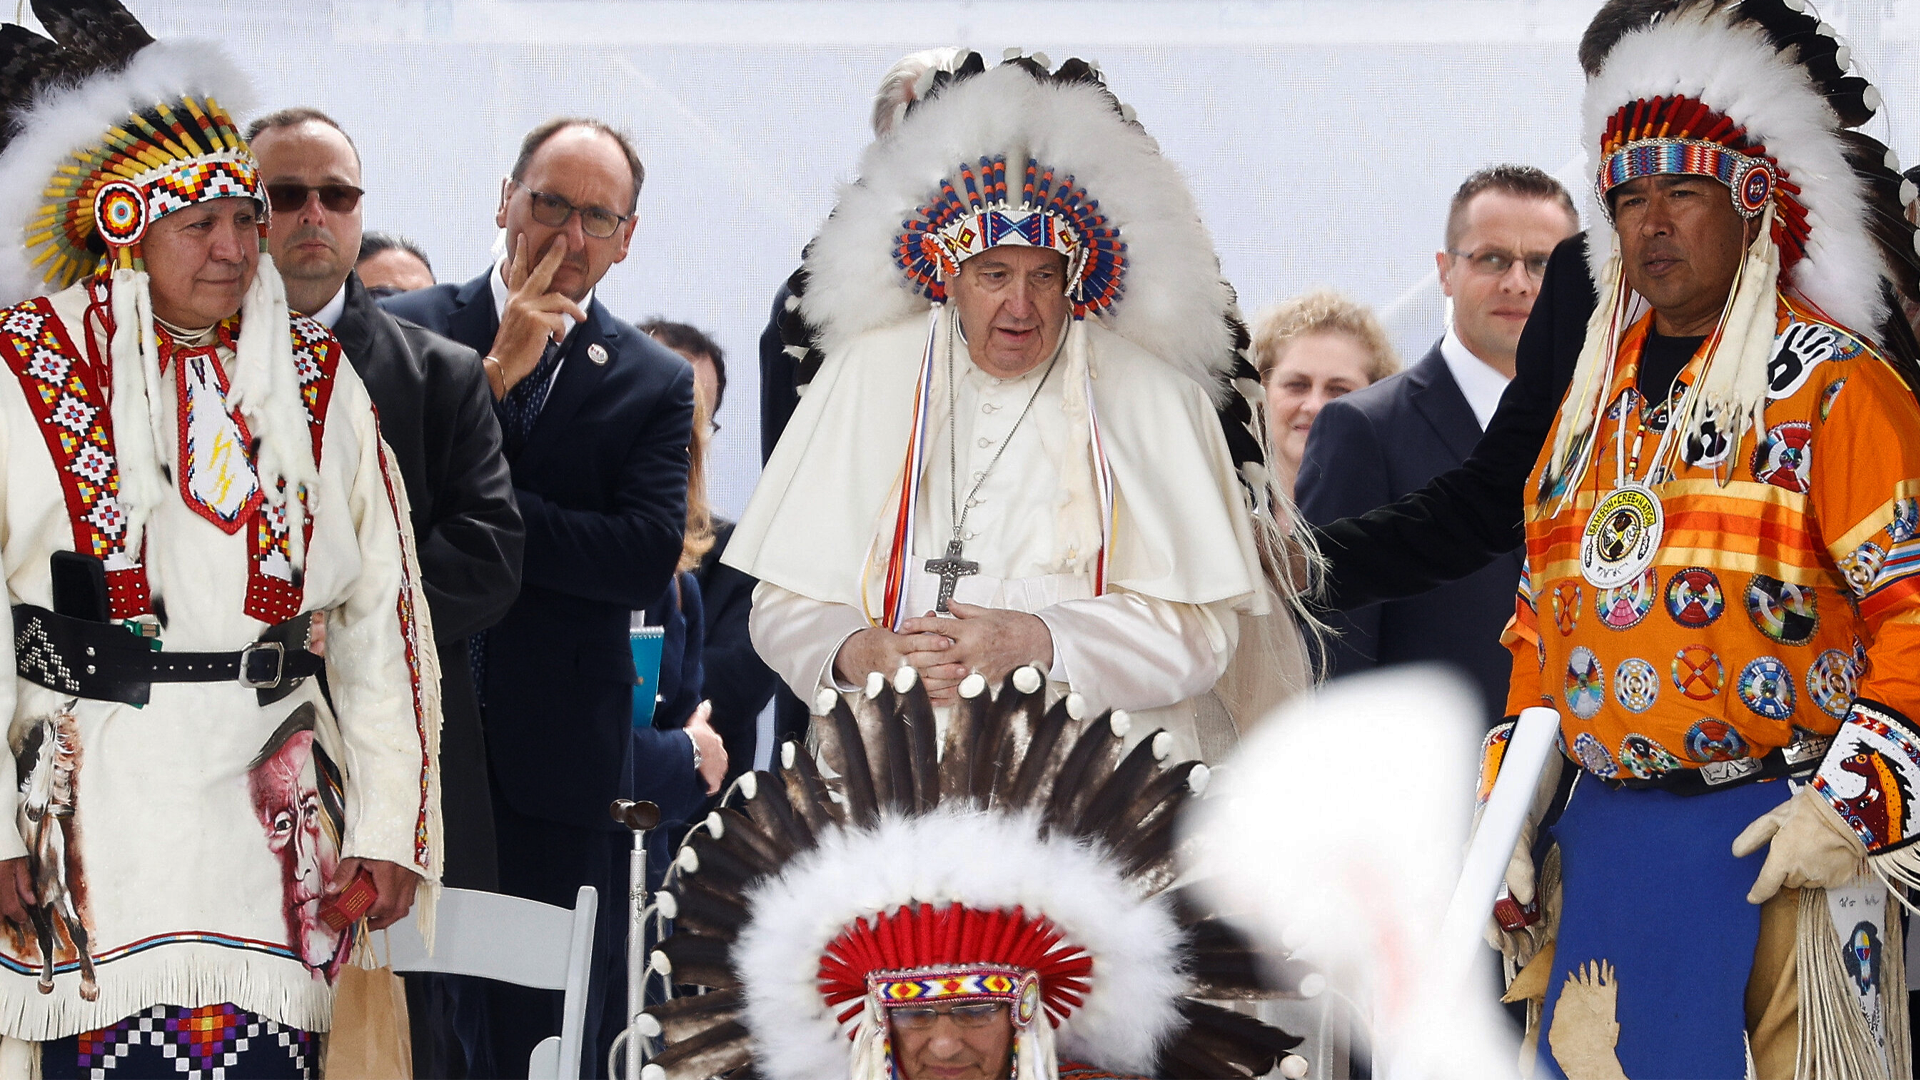 Pope Francis apologises for Indigenous residential school system